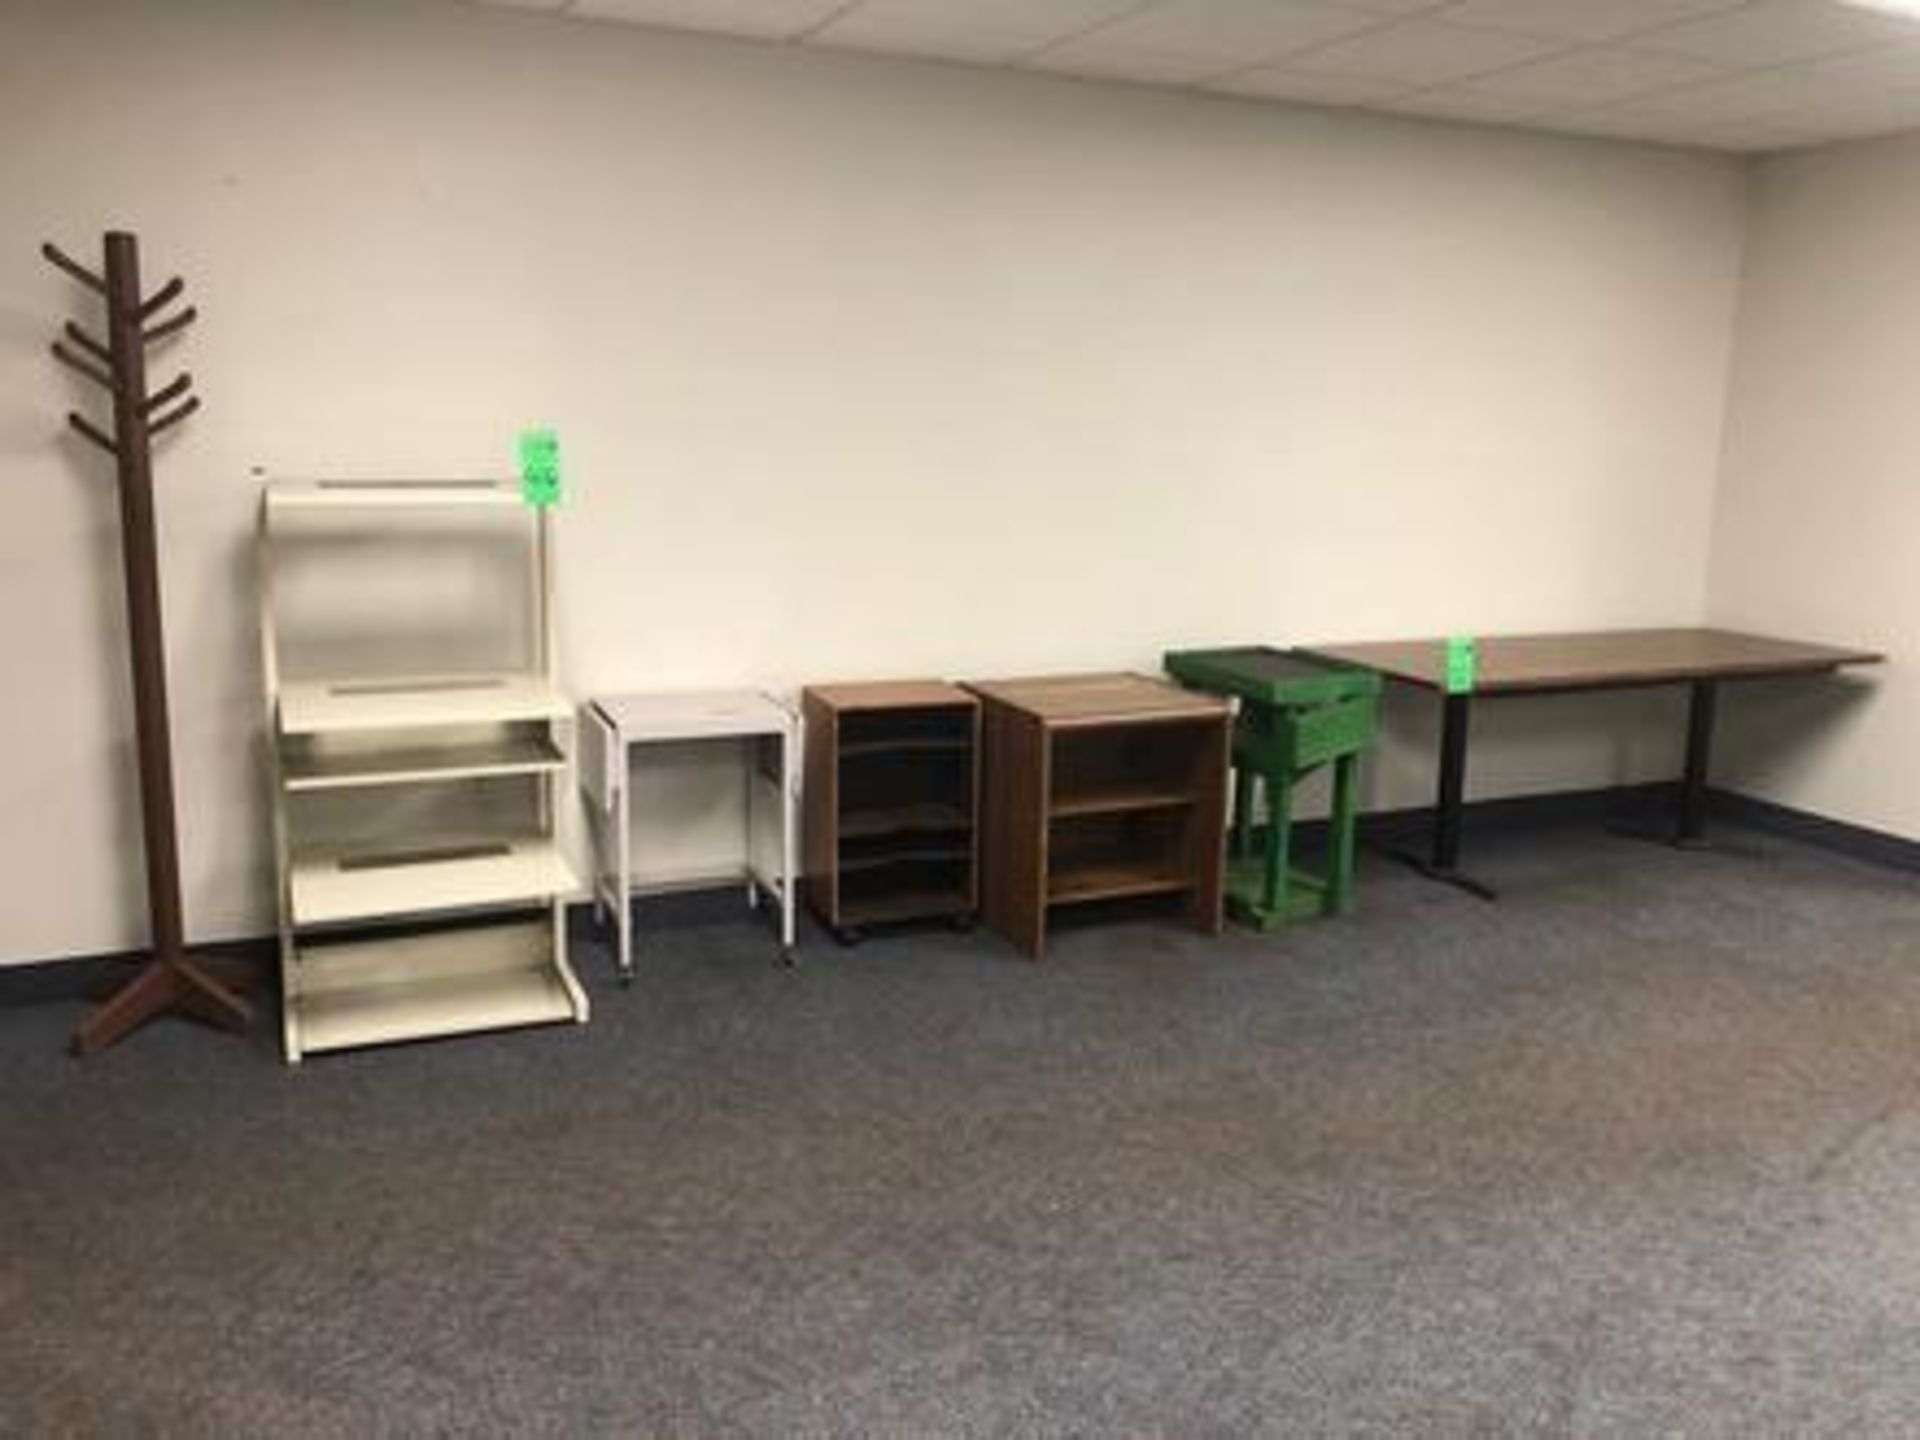 Office Furniture to include Desks, Cabinets and hanger